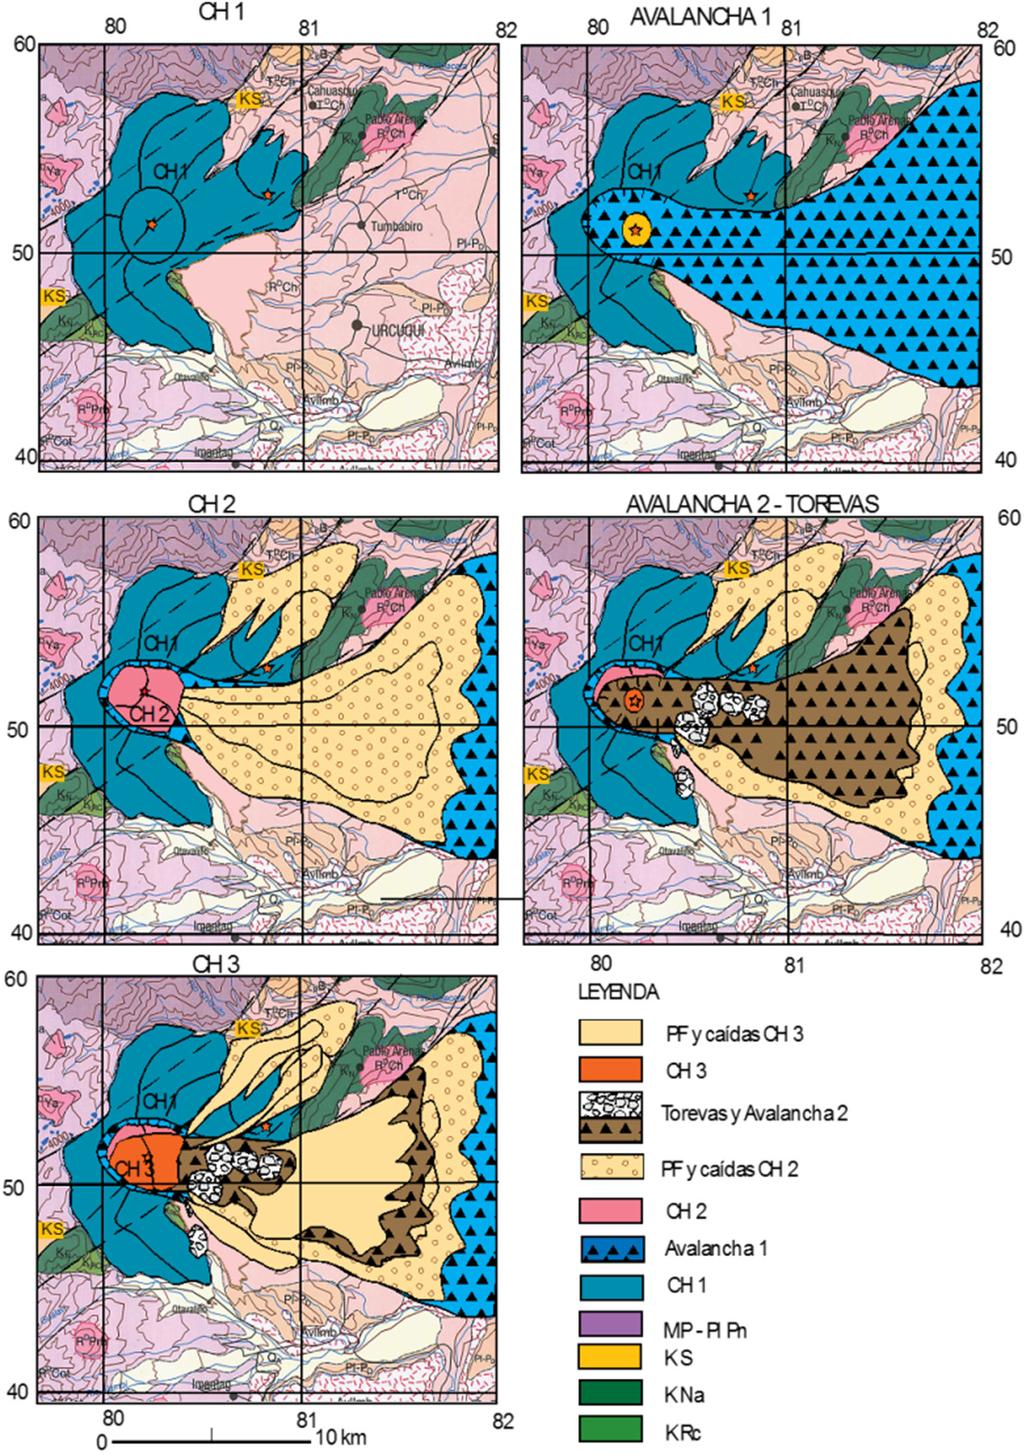 1 Volcanic evolution of Chachimbiro The Chachimbiro project area is located in the Chachimbiro volcanic complex (Figures 4 and 5), composed of andesitic lava flows and pyroclastic deposits associated